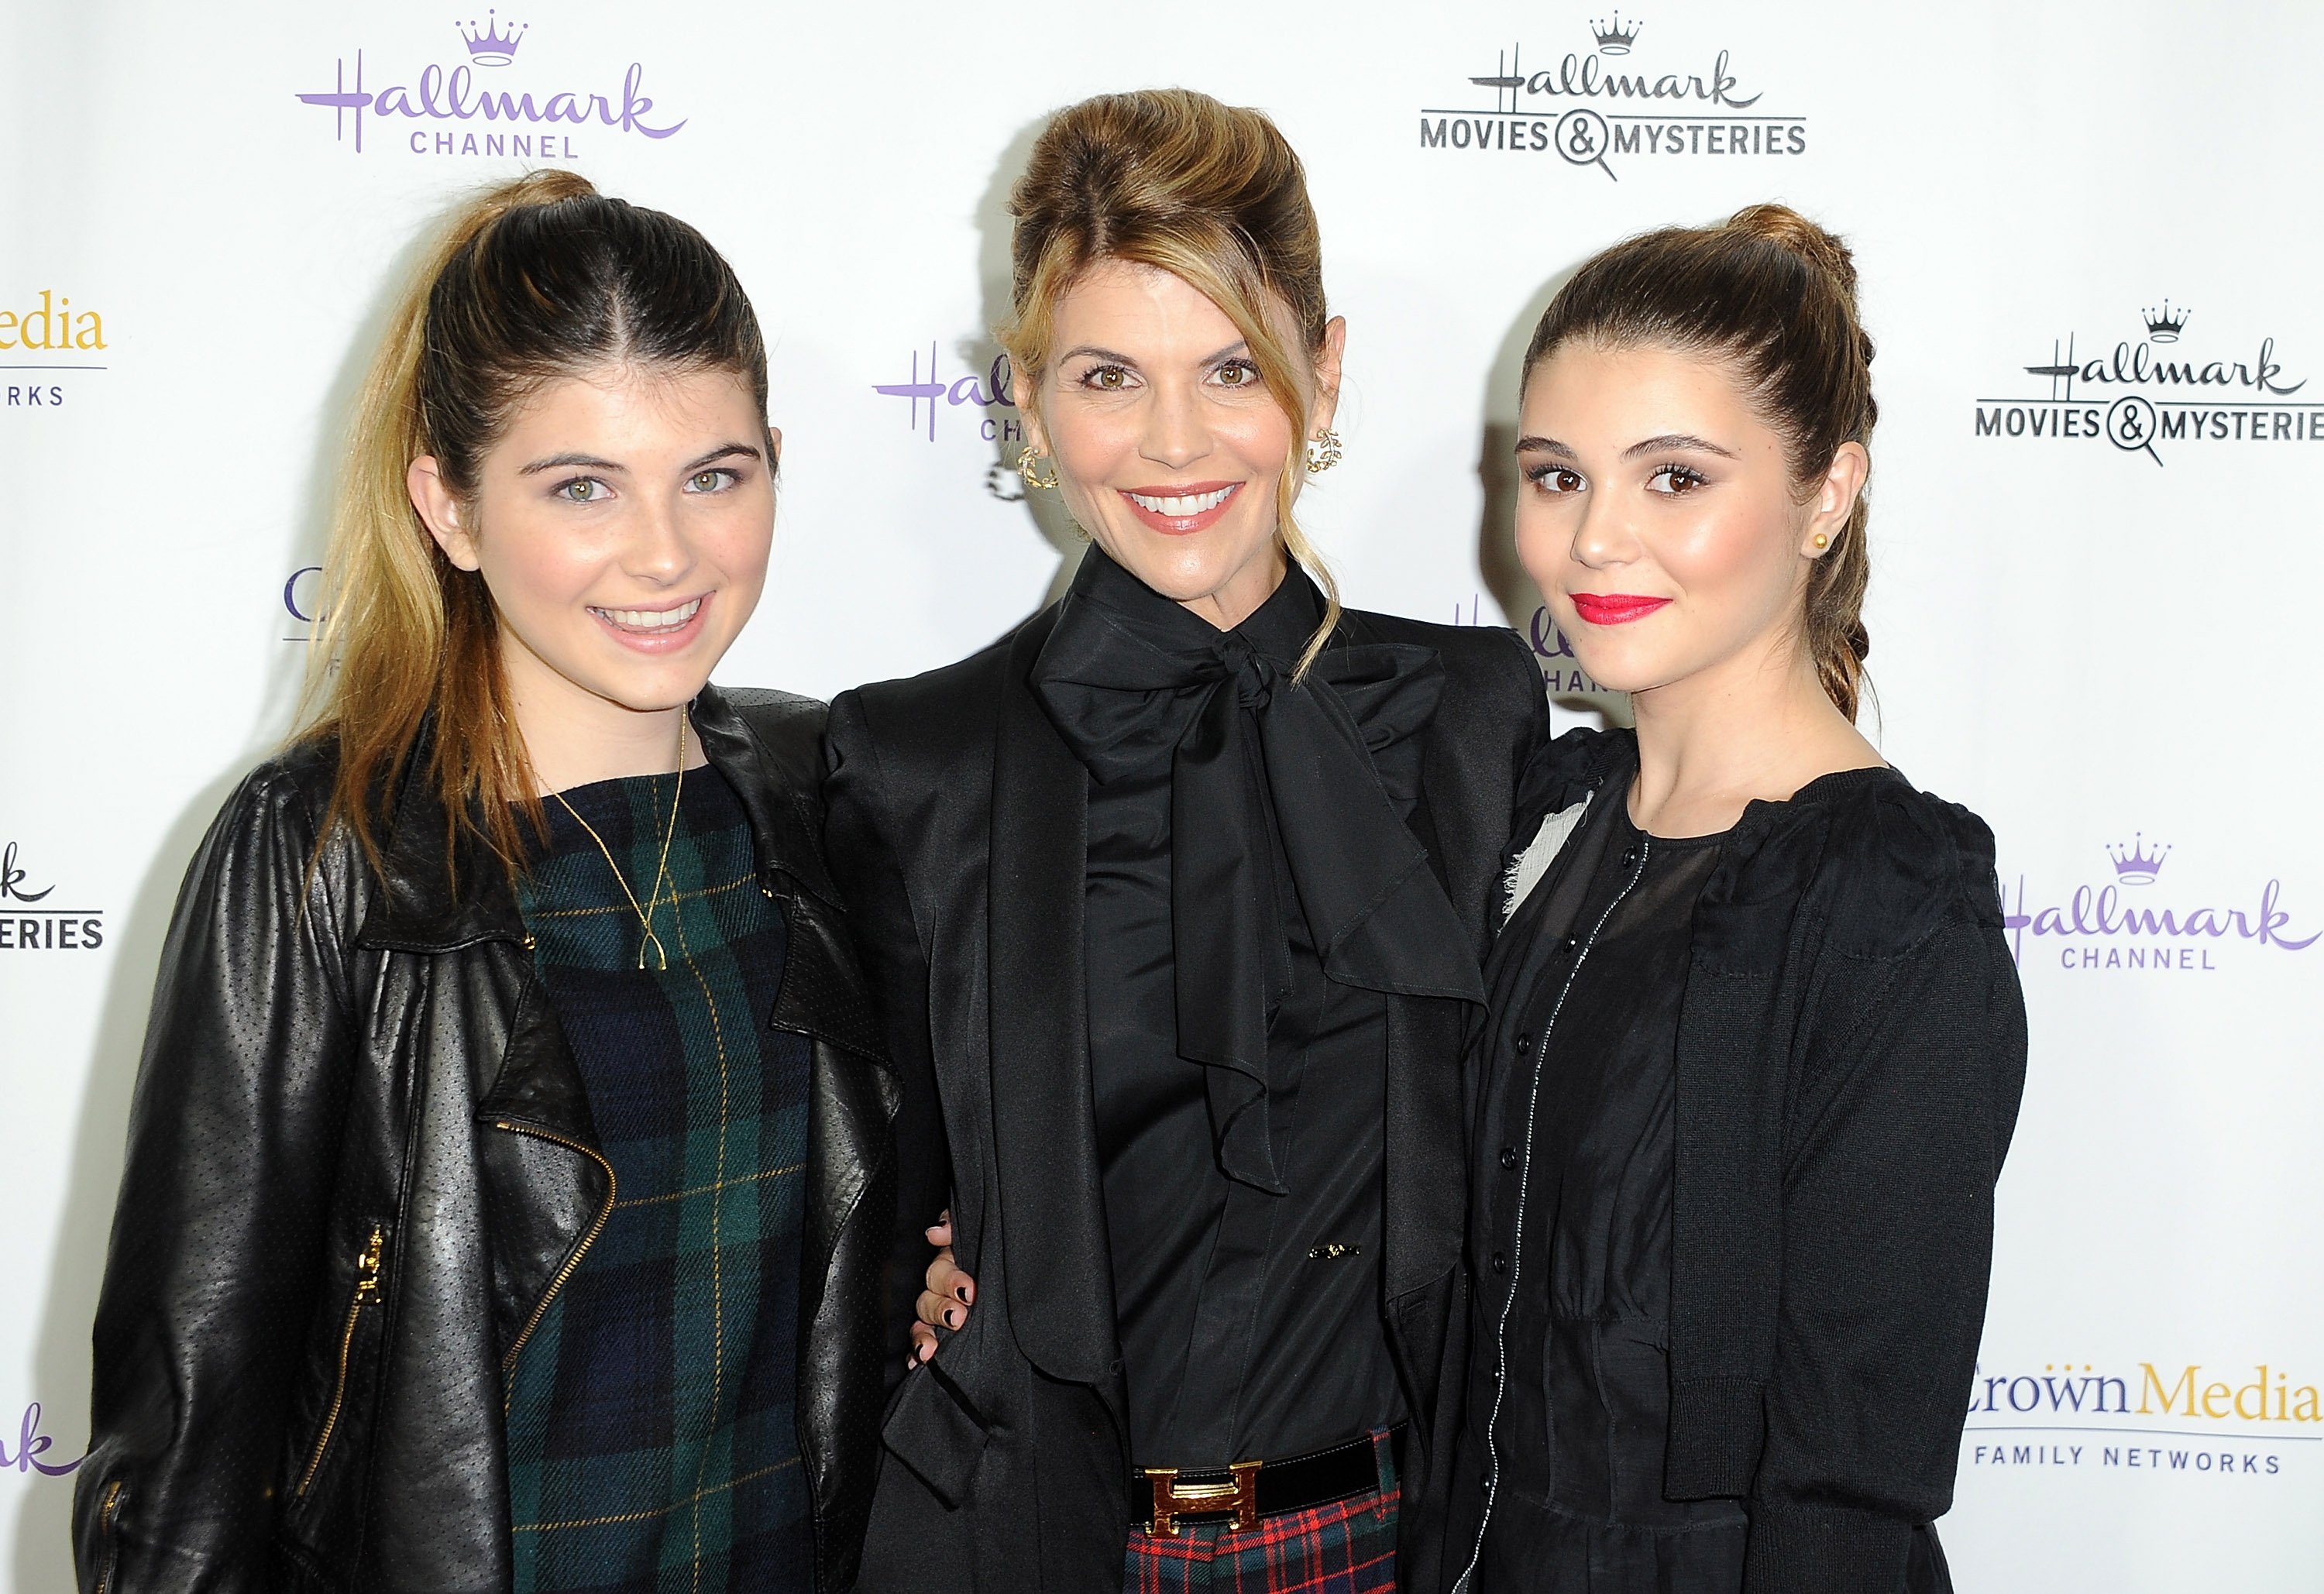 Lori Loughlin and her daughters Isabella Giannulli and Olivia Giannulli arrive at Hallmark Channel's premiere screening of "Northpole." | Photo: GettyImages